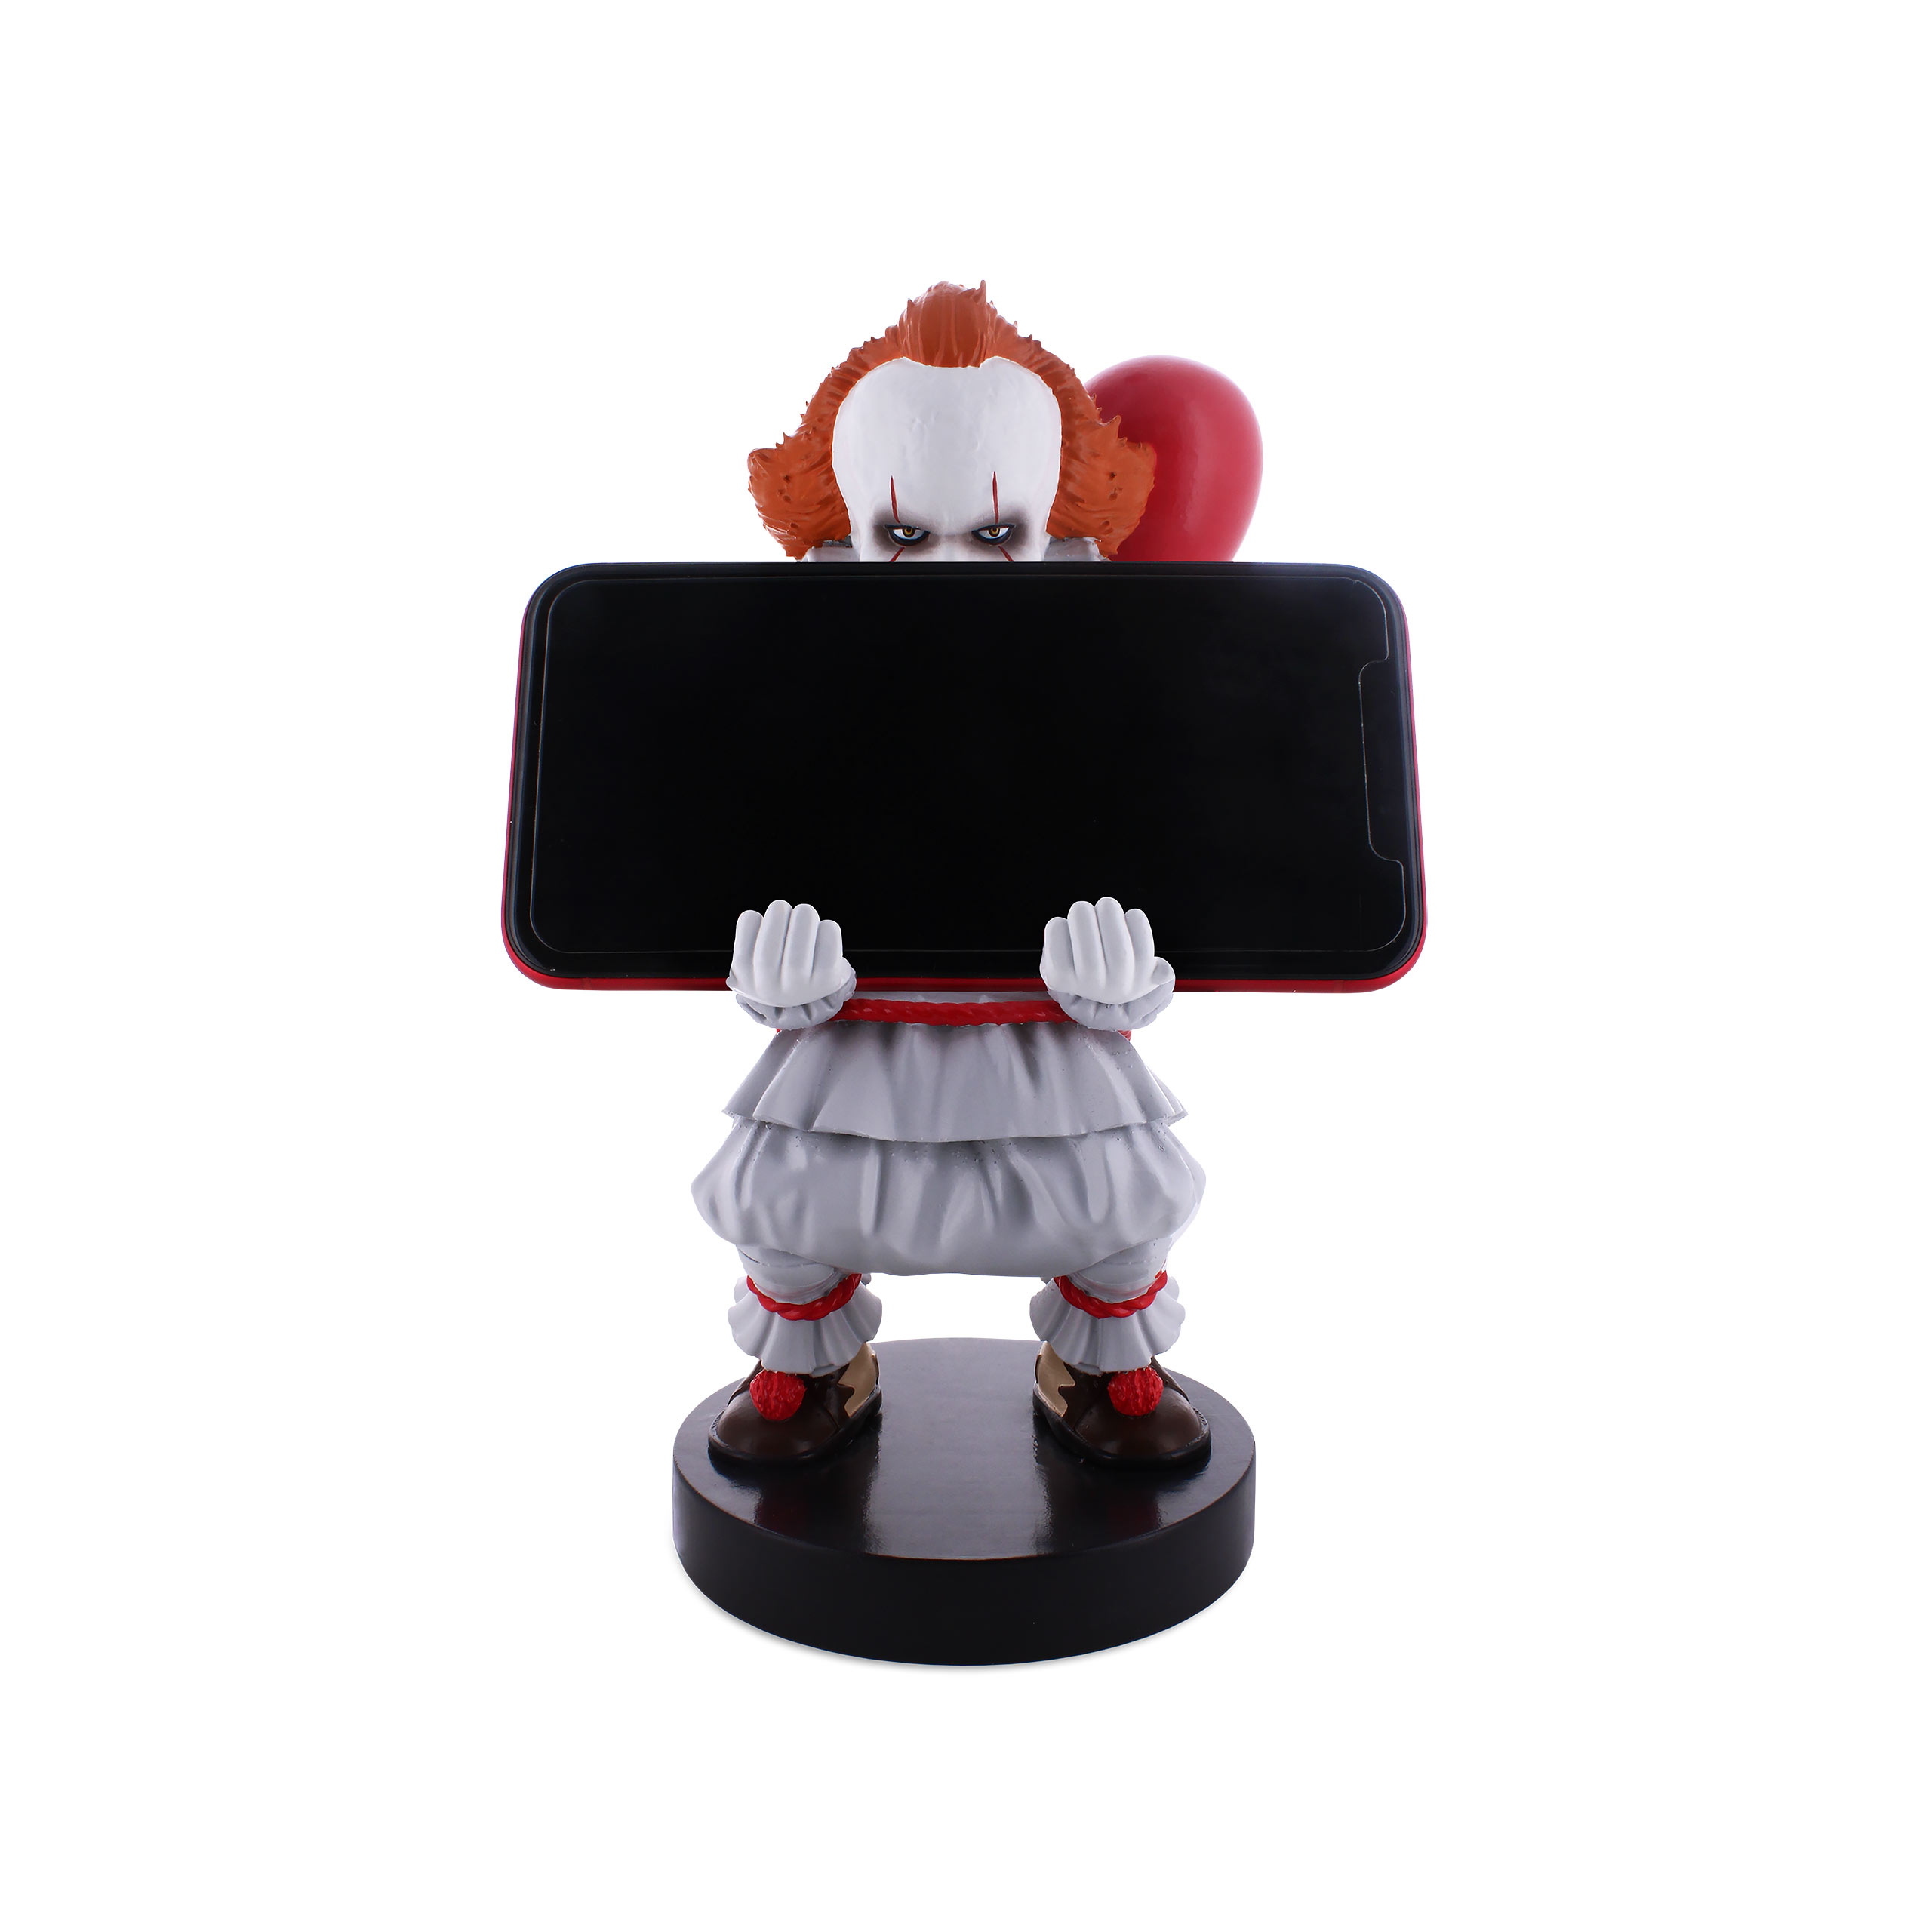 Stephen King's IT - Pennywise Cable Guy Figure